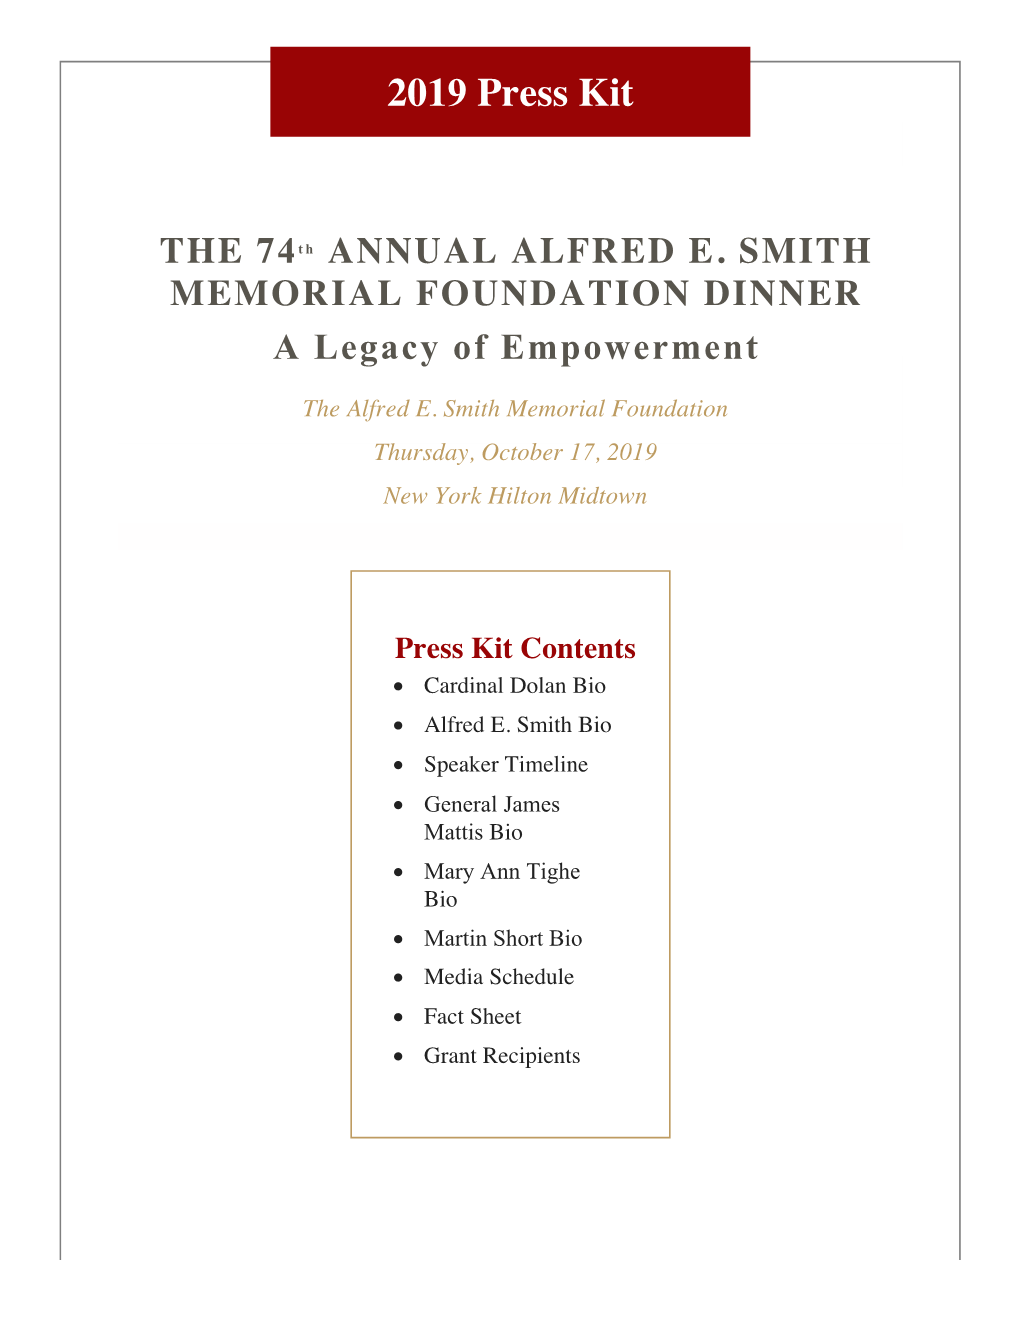 The 74Th Alfred E. Smith Memorial Foundation Dinner Press Kit